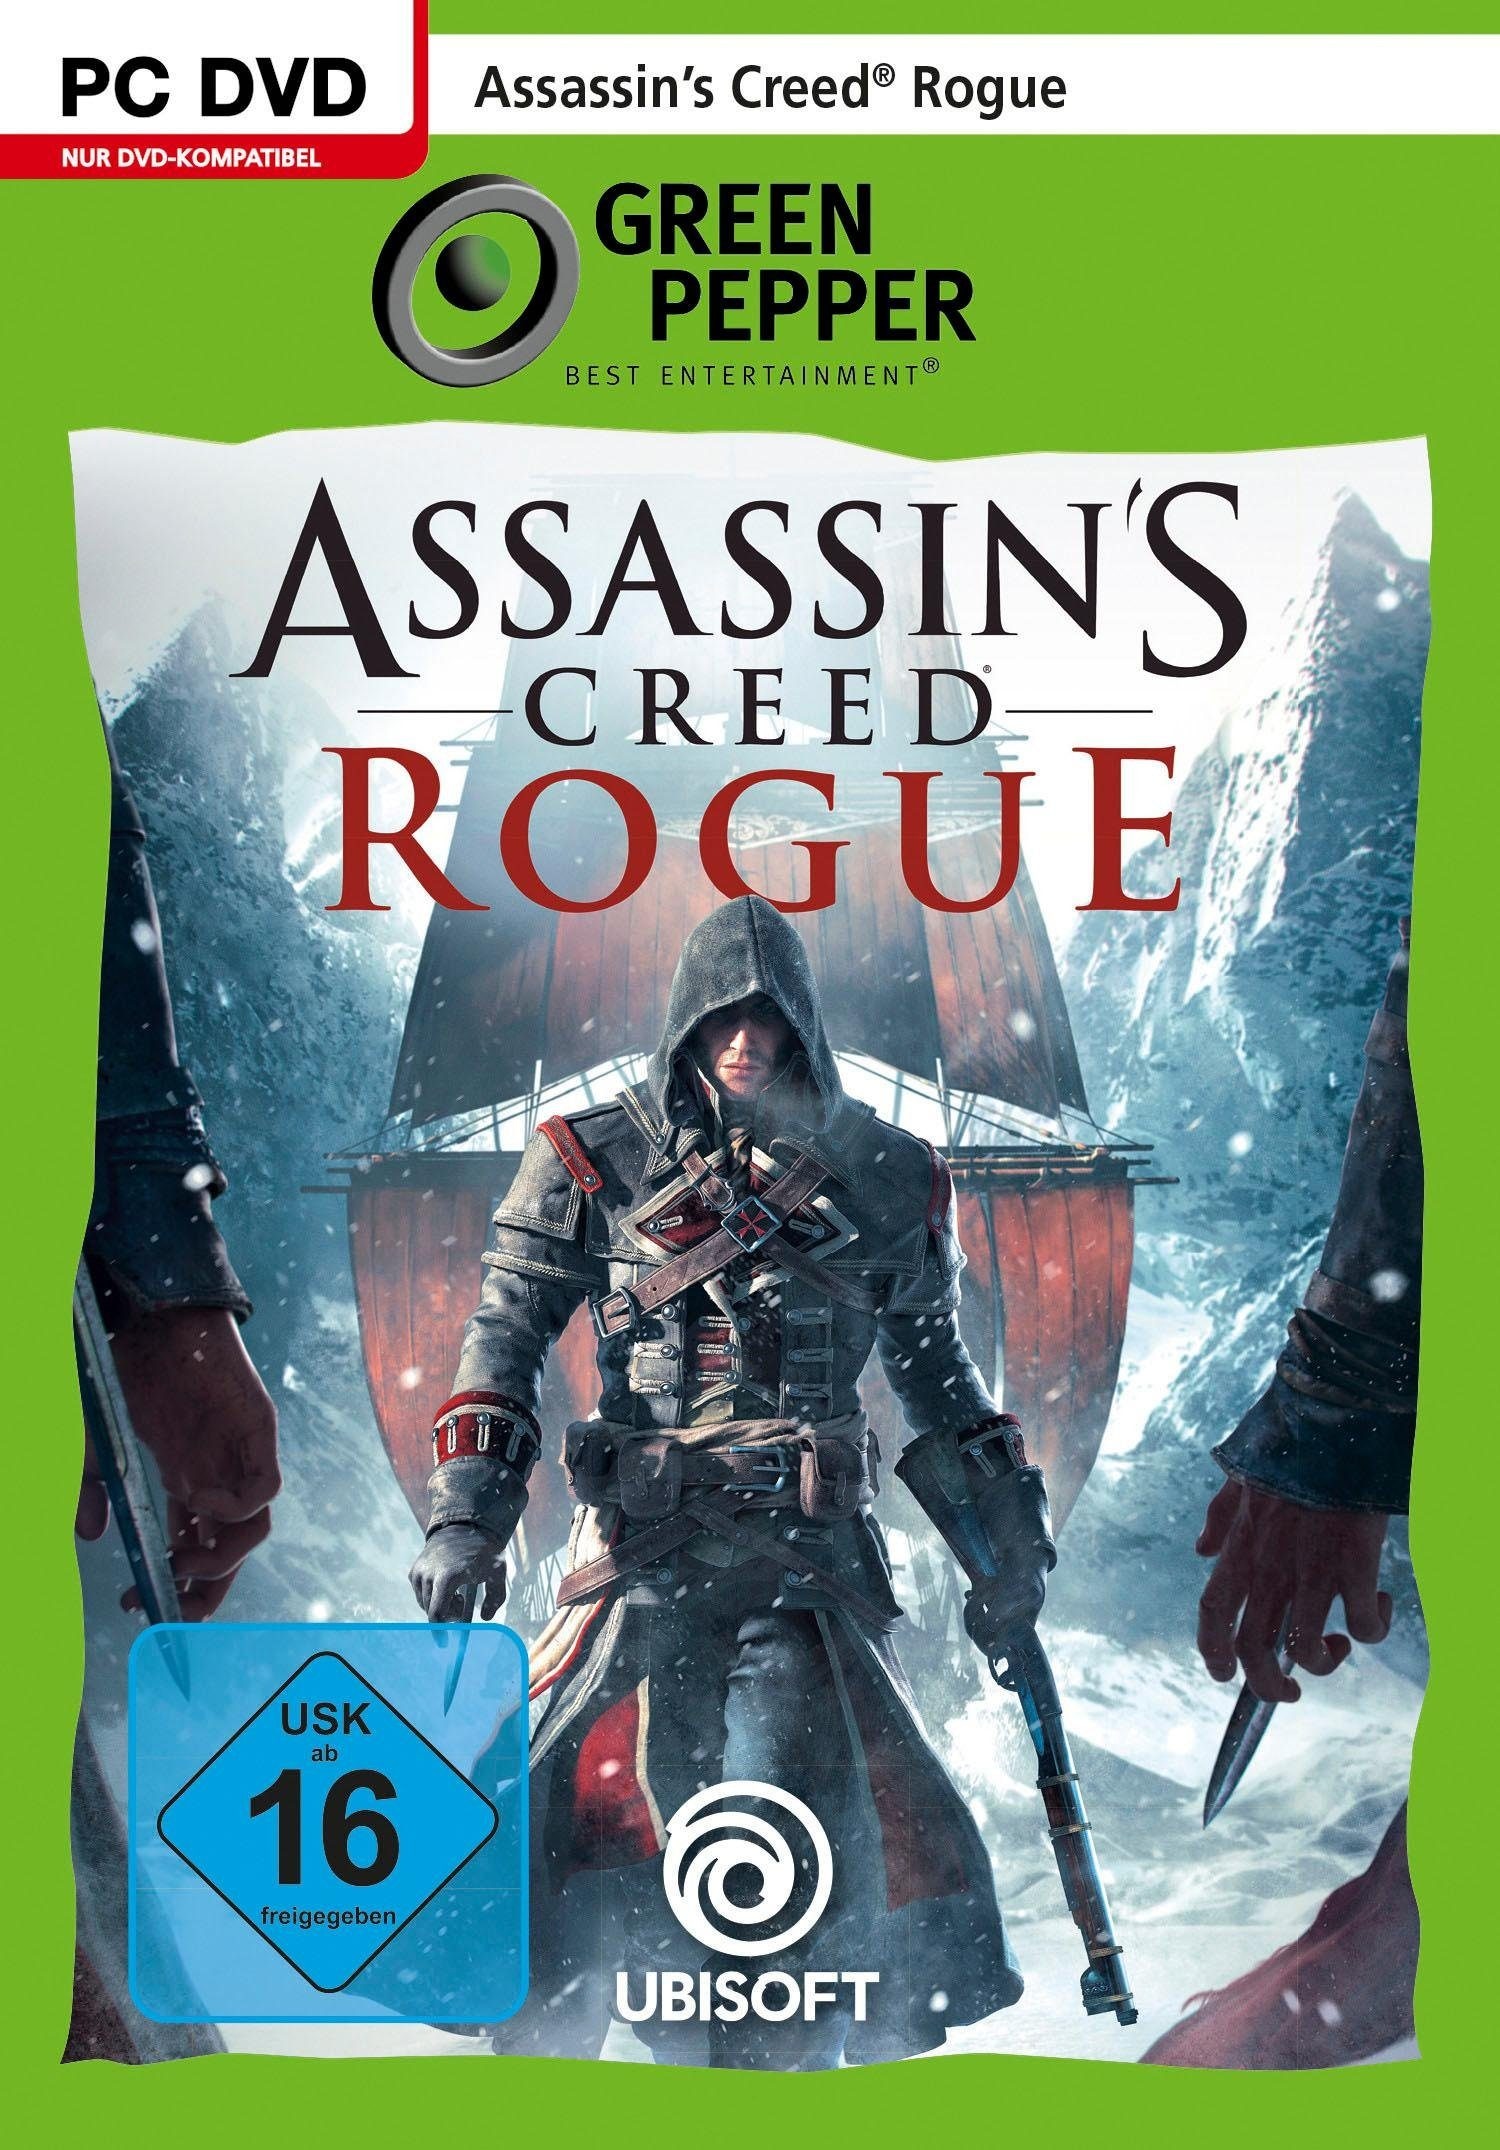 UBISOFT Spielesoftware »Assassin's Creed Rogue«, PC, Software Pyramide